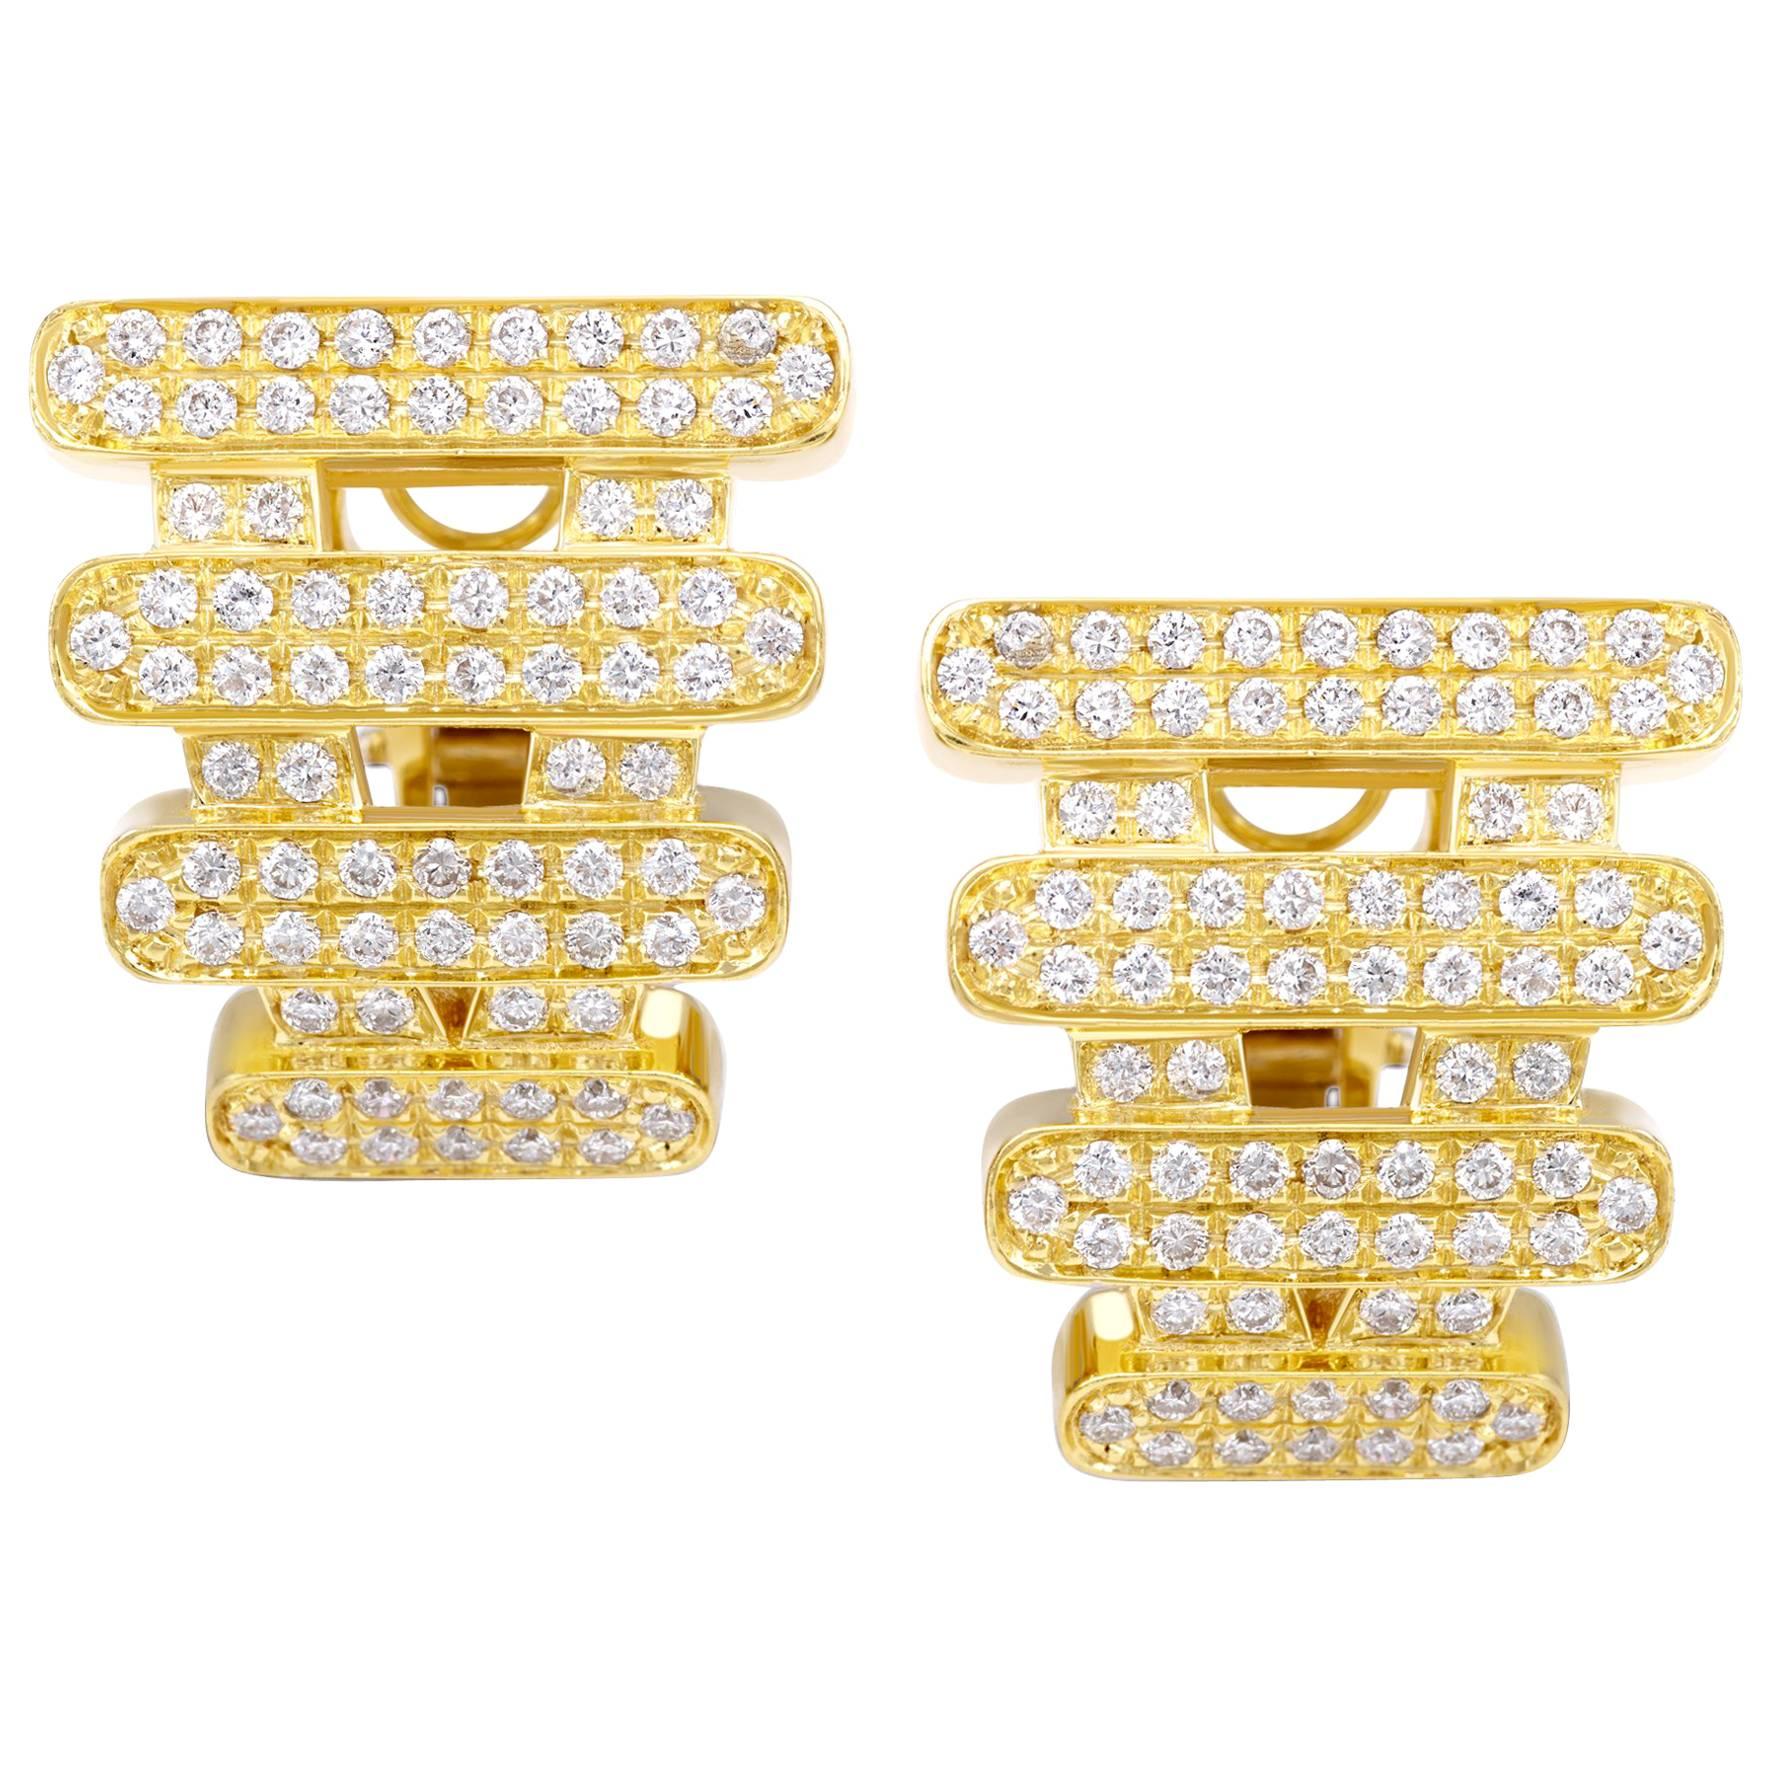 Earrings Collection "Moonlight" 18 Karat Yellow Gold and Diamonds